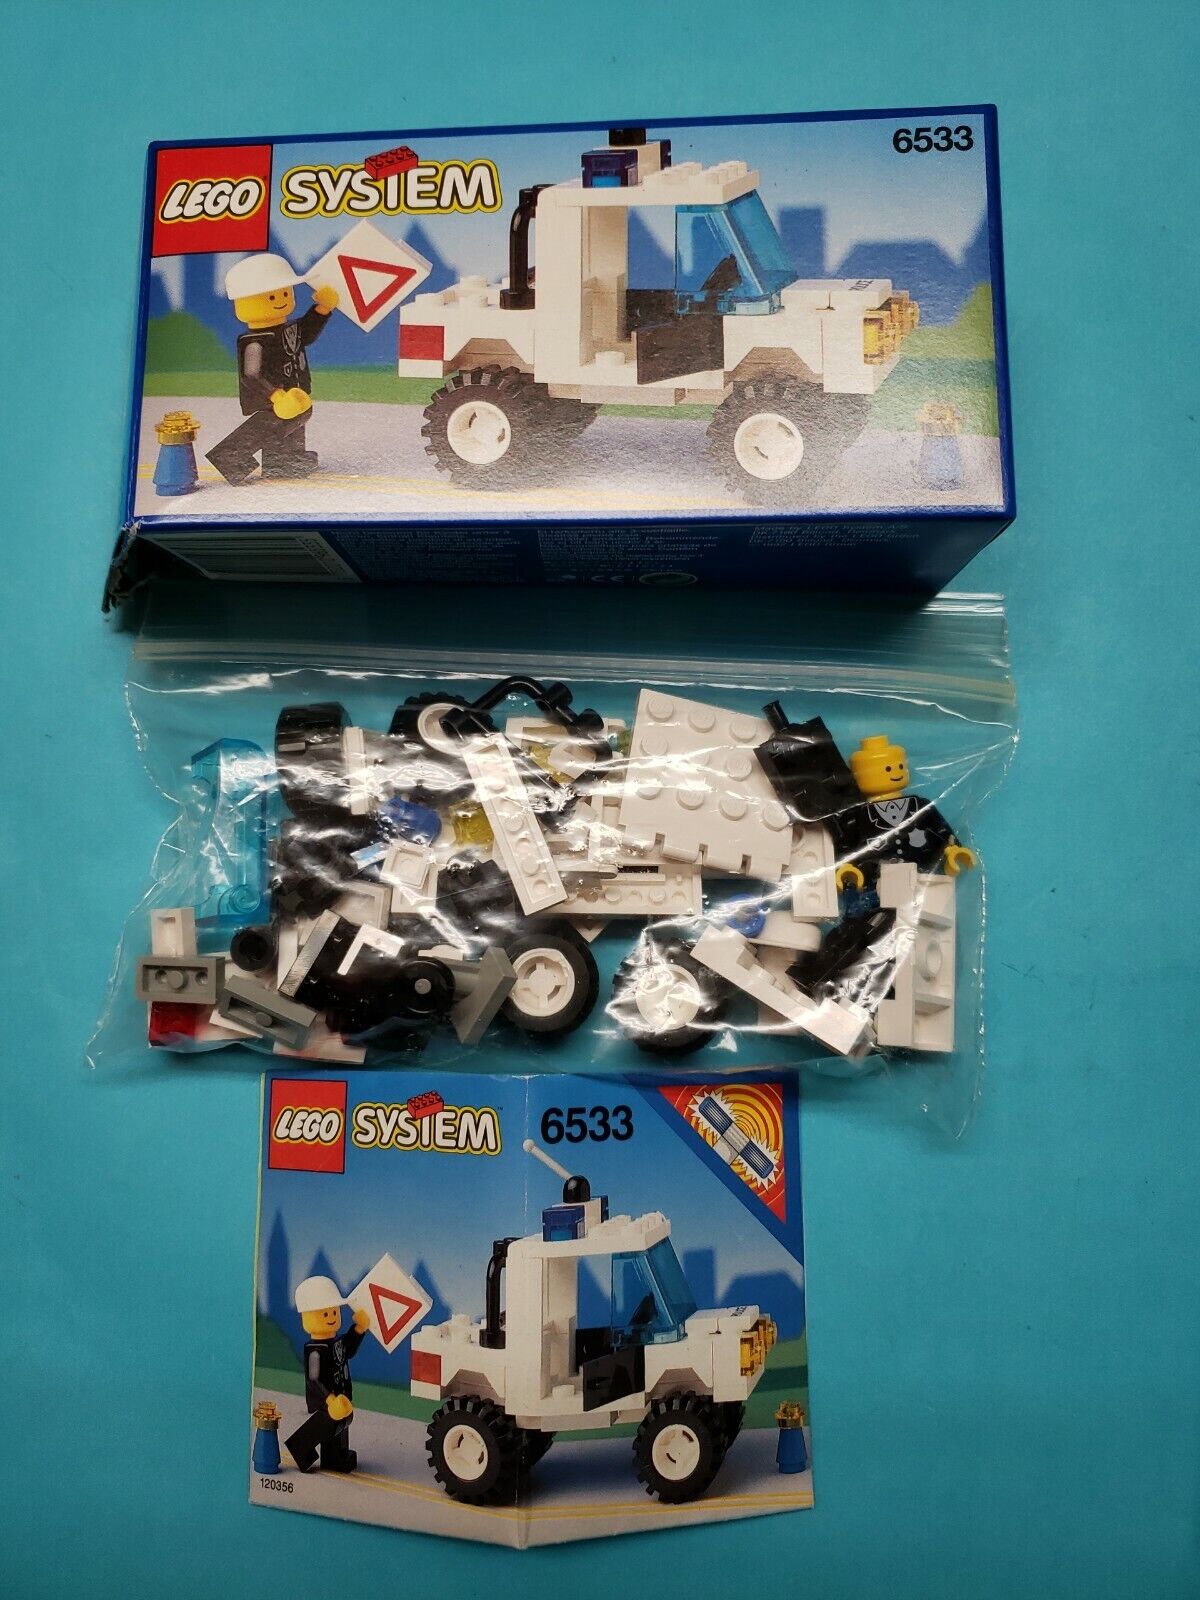 Lego Classic Town Set 6533 Police 4x4 Complete Box, Manual, Minifigs!